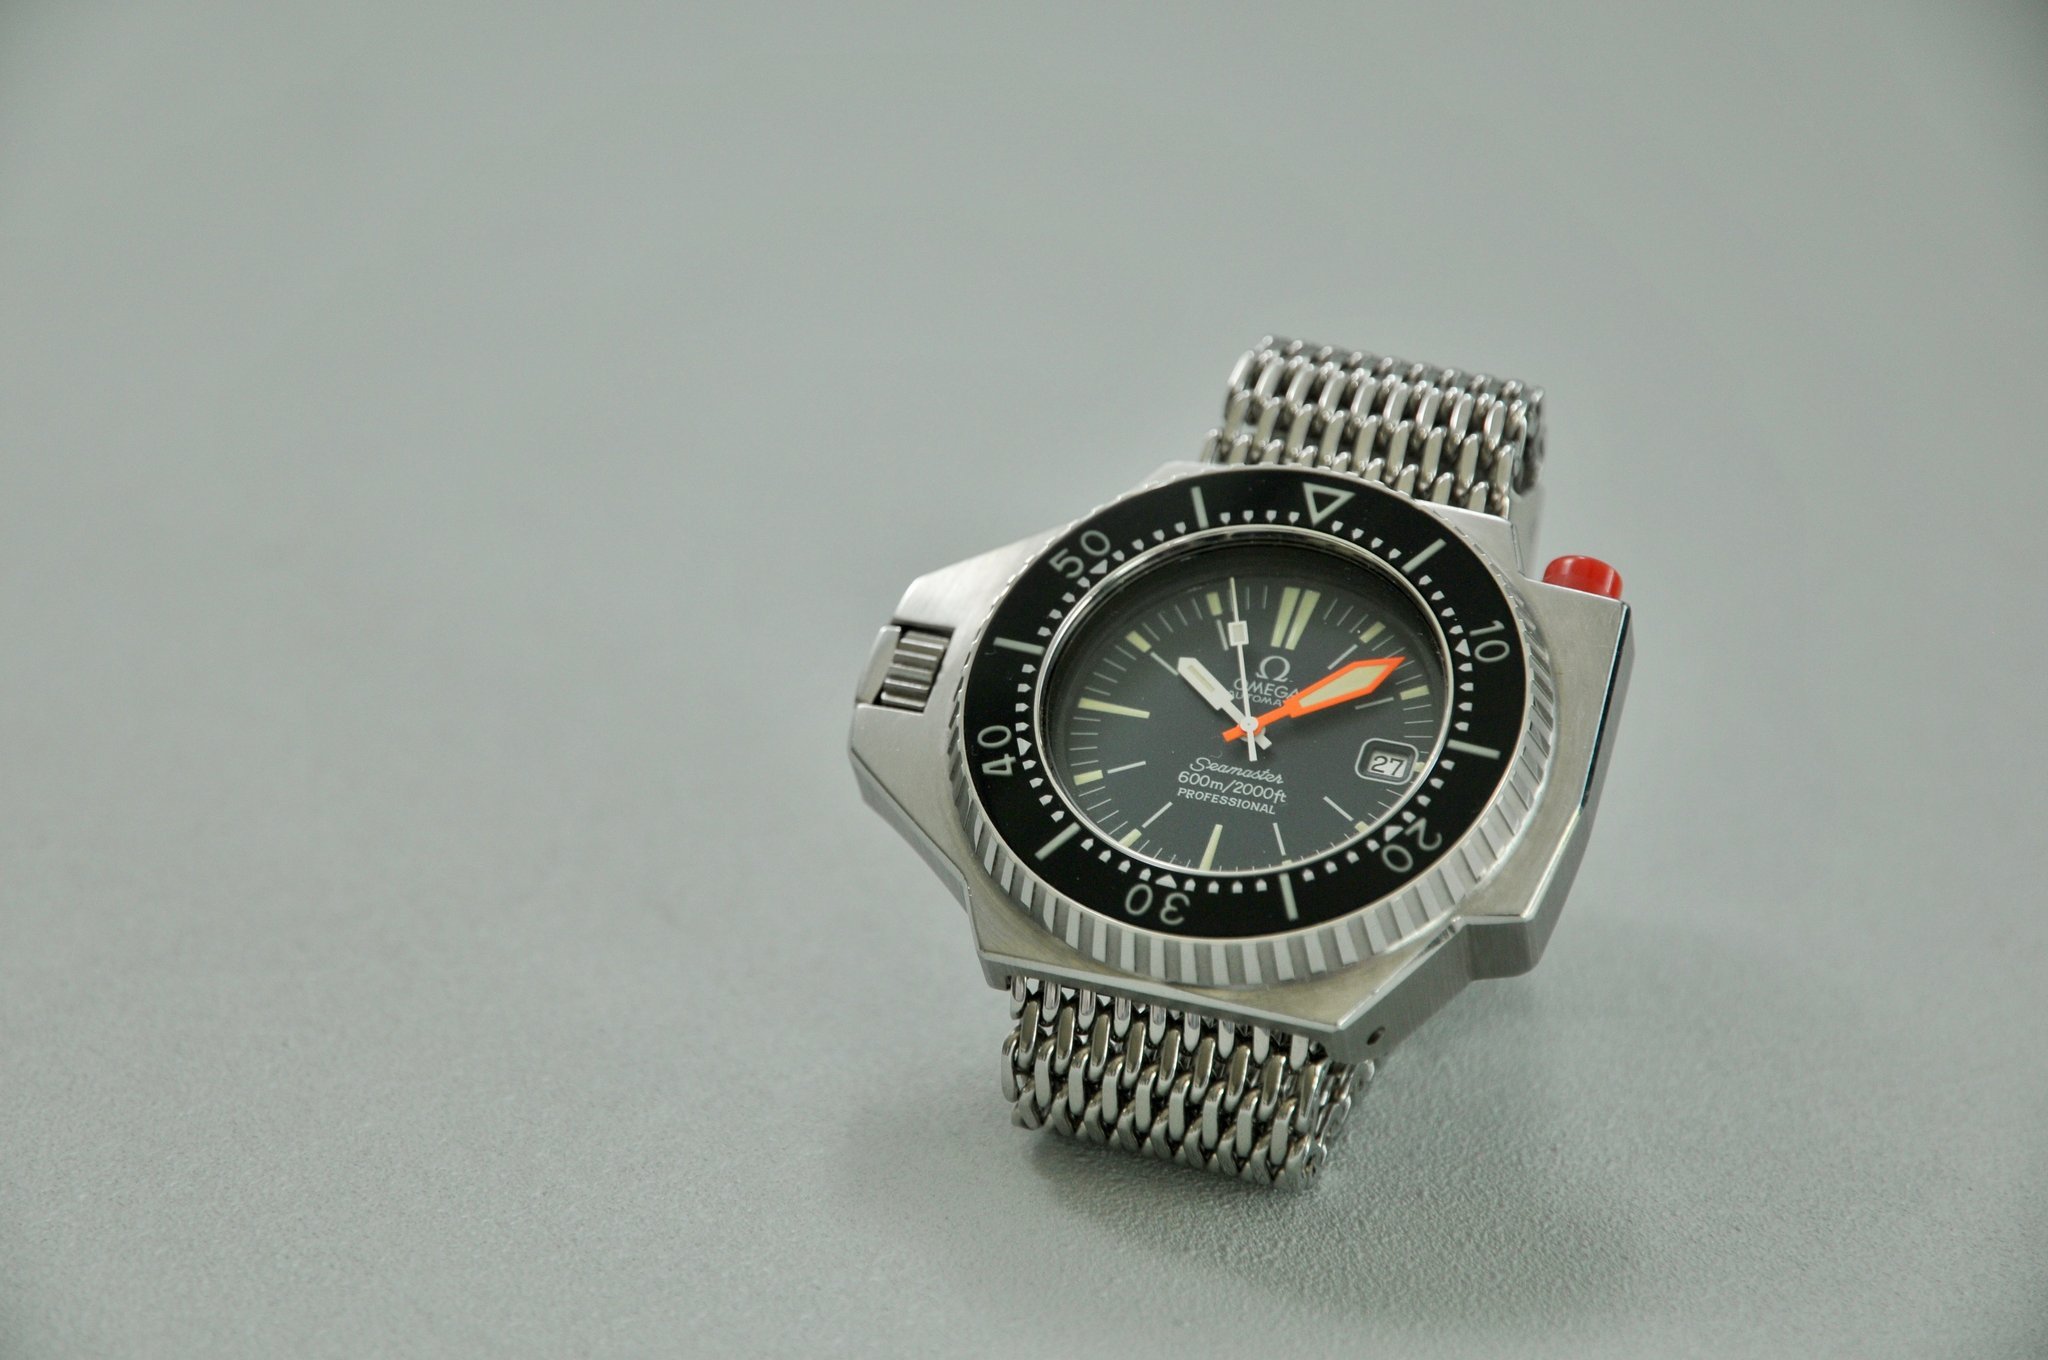 The Omega Seamaster 600 Ploprof is definitely not the smallest dive watch ever